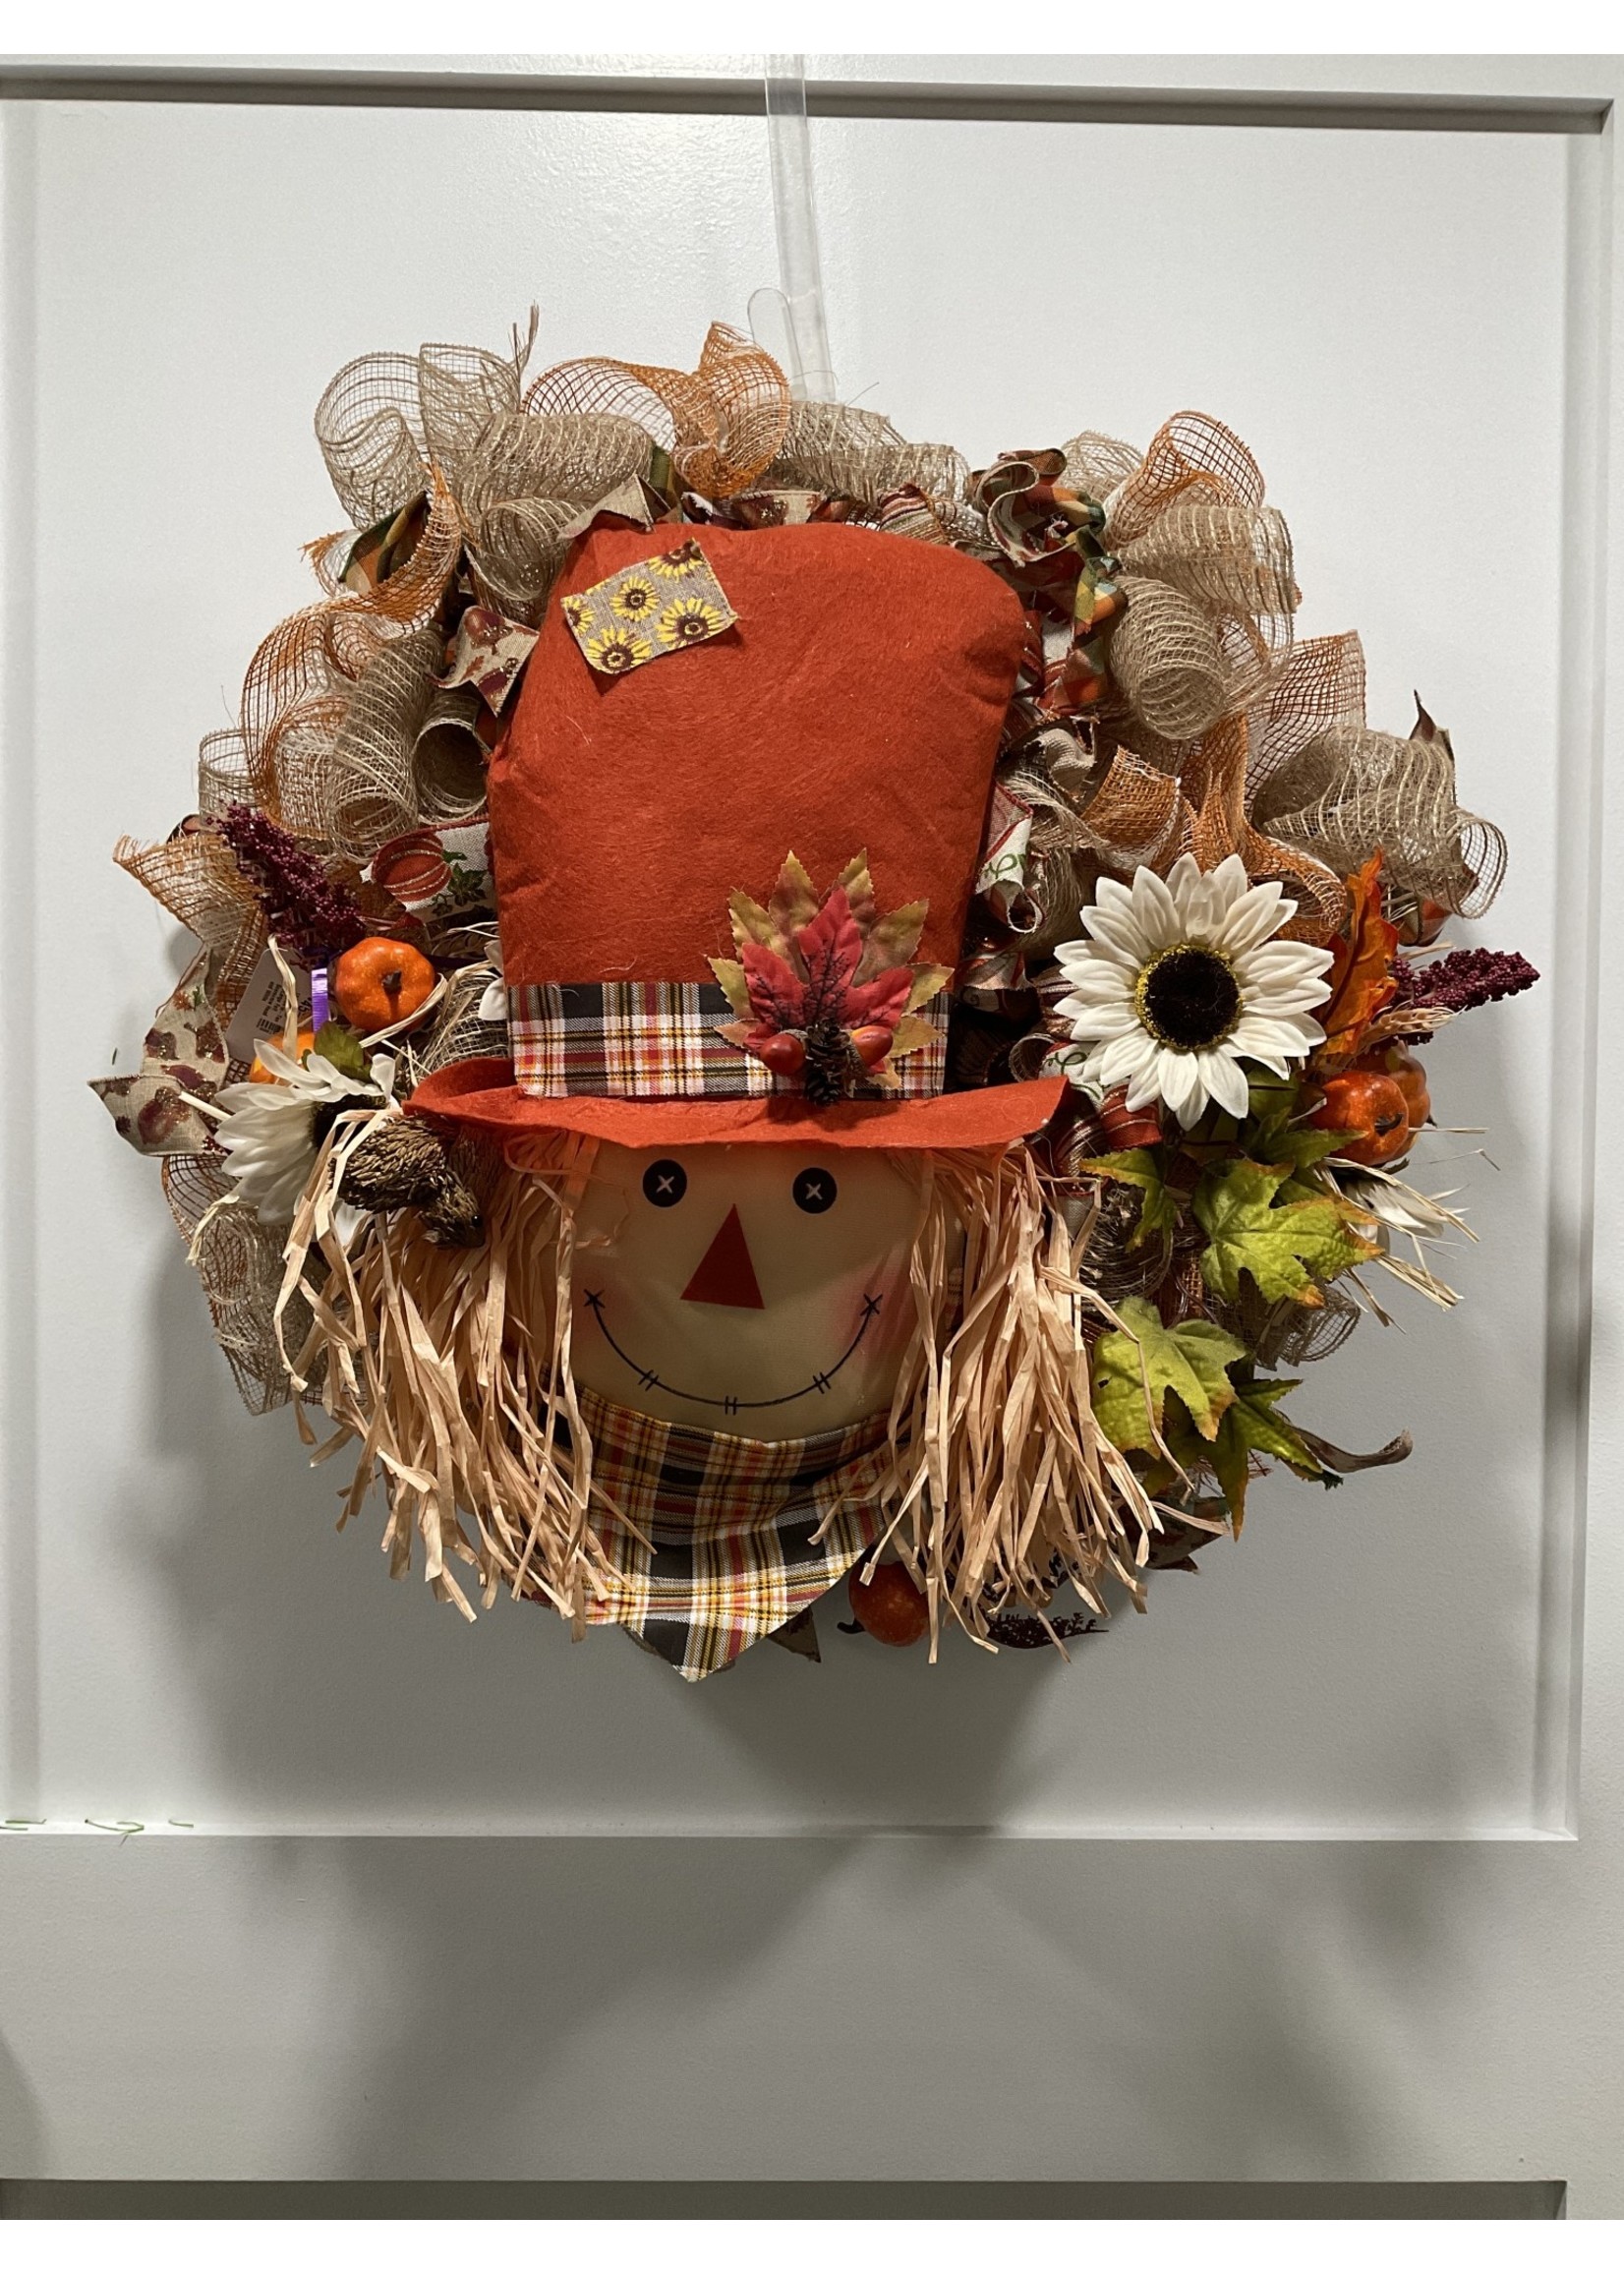 My New Favorite Thing 1343 Wreath Mesh 24 in-Tan w/Large Felt Scarecrow Head and White Flower and Multi Ribbon